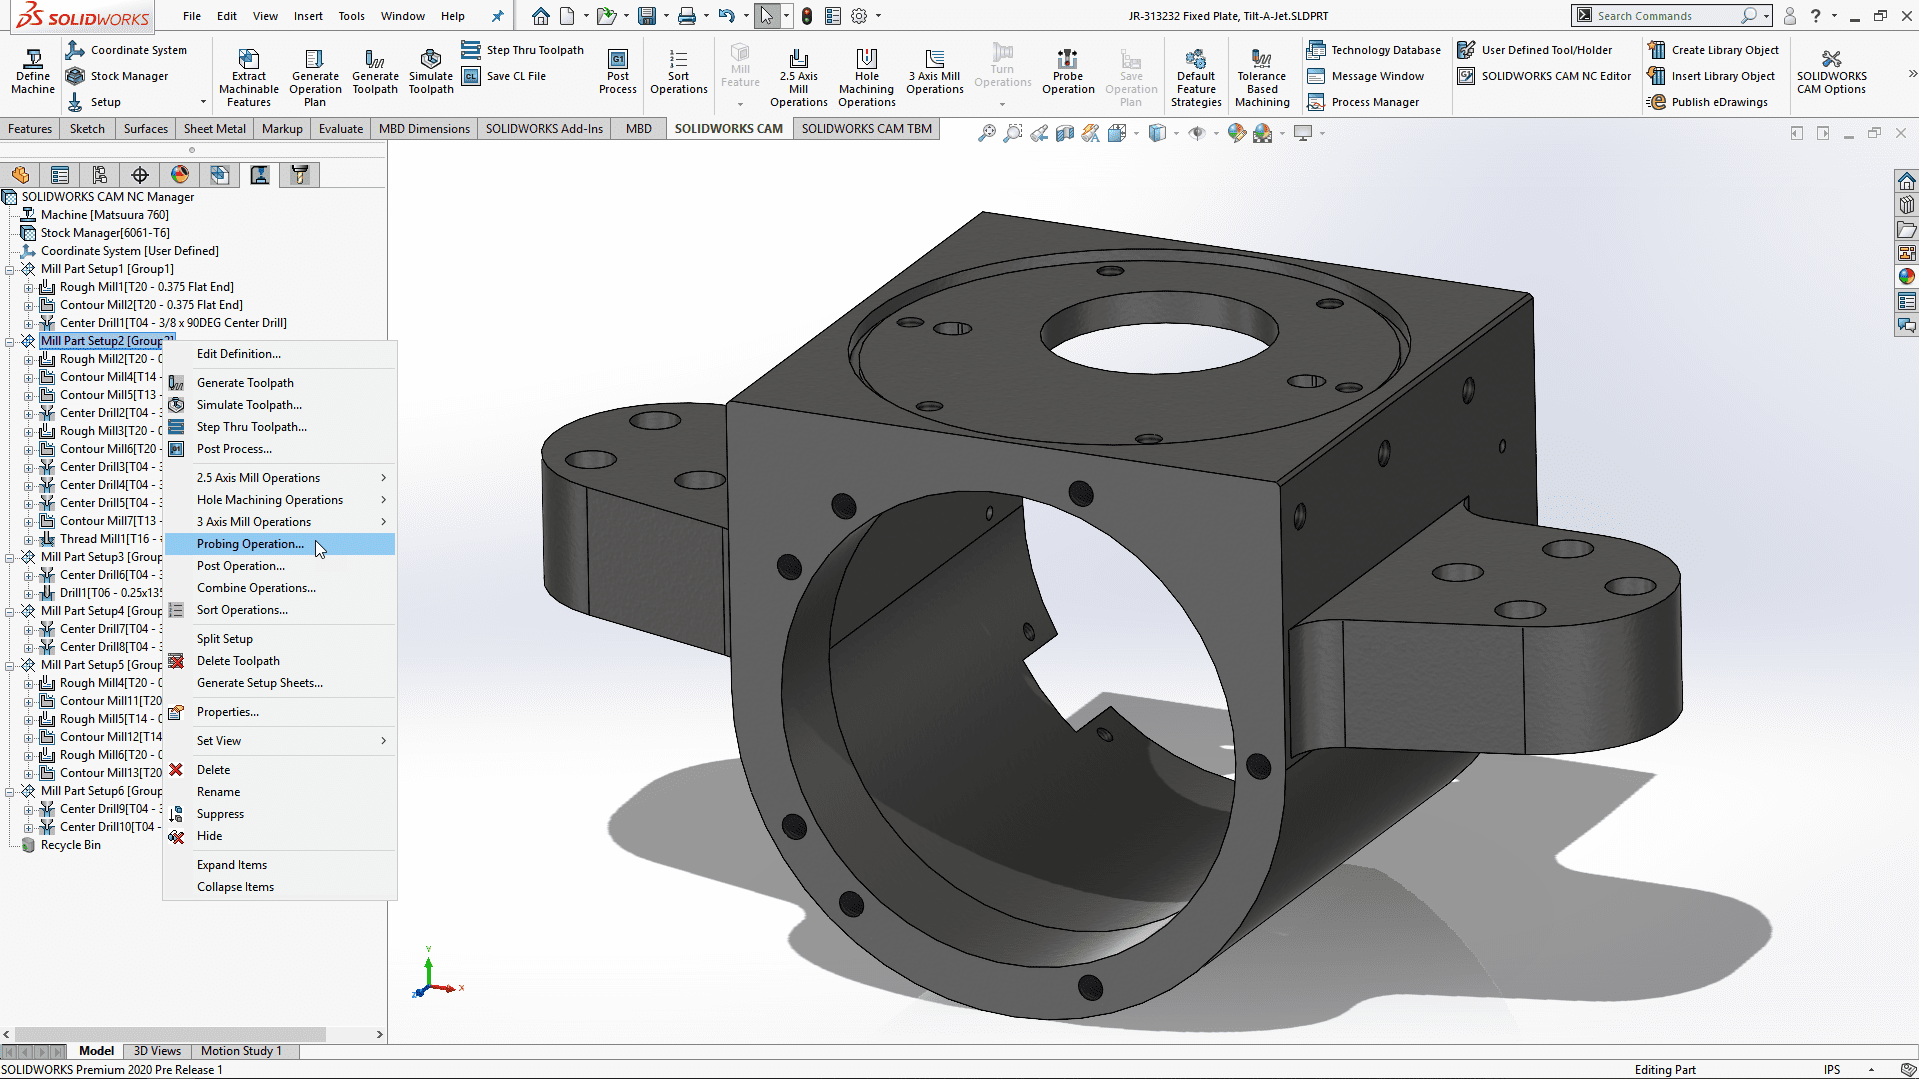 New features in SOLIDWORKS CAM 2020 software - ViHoth